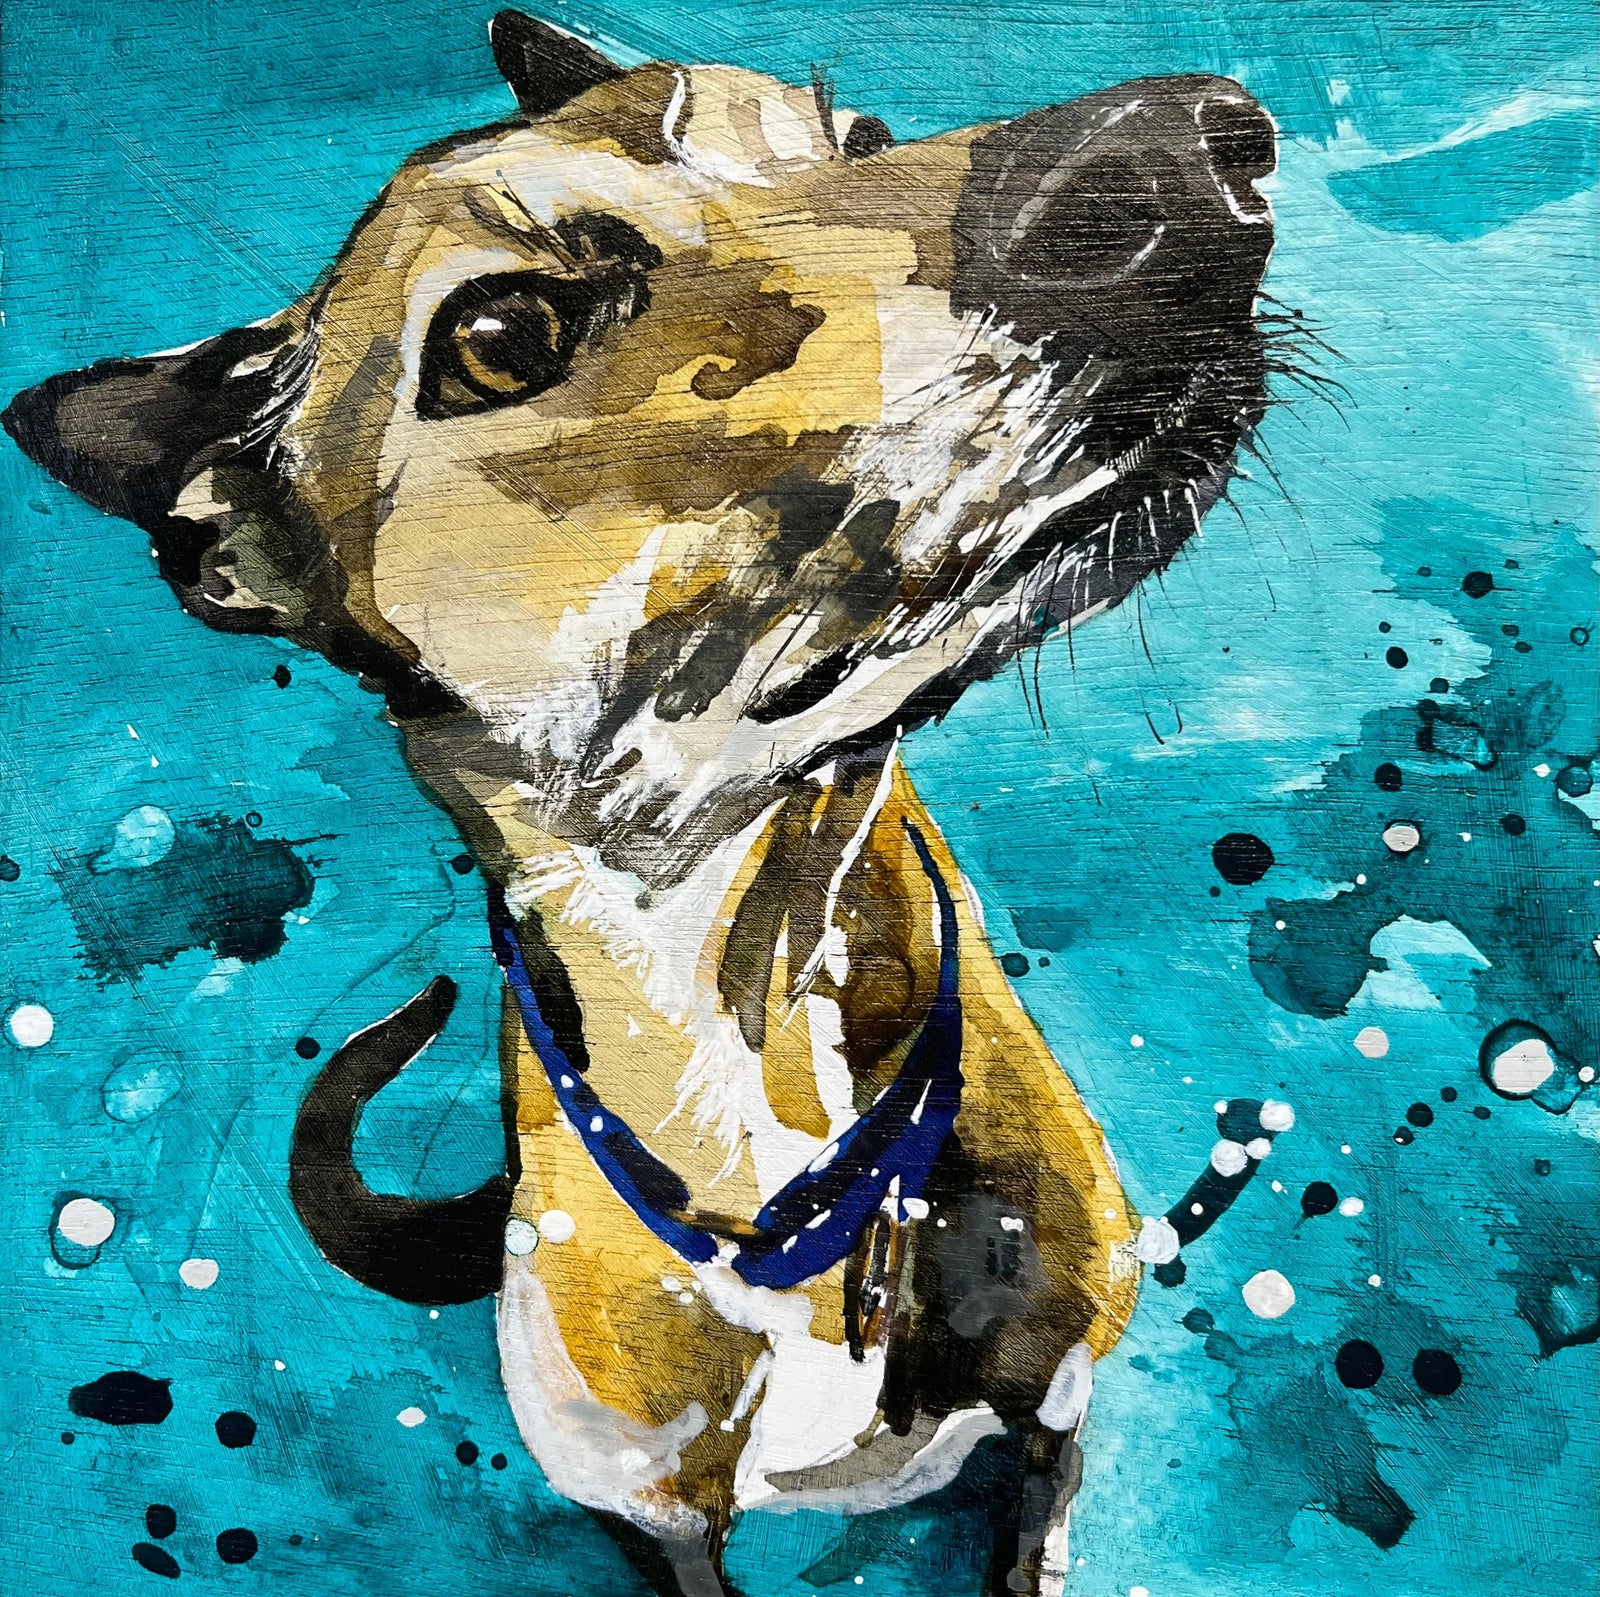 'Burt'  acrylic and ink by Lucy Davies, available at Padstow Gallery, Cornwall